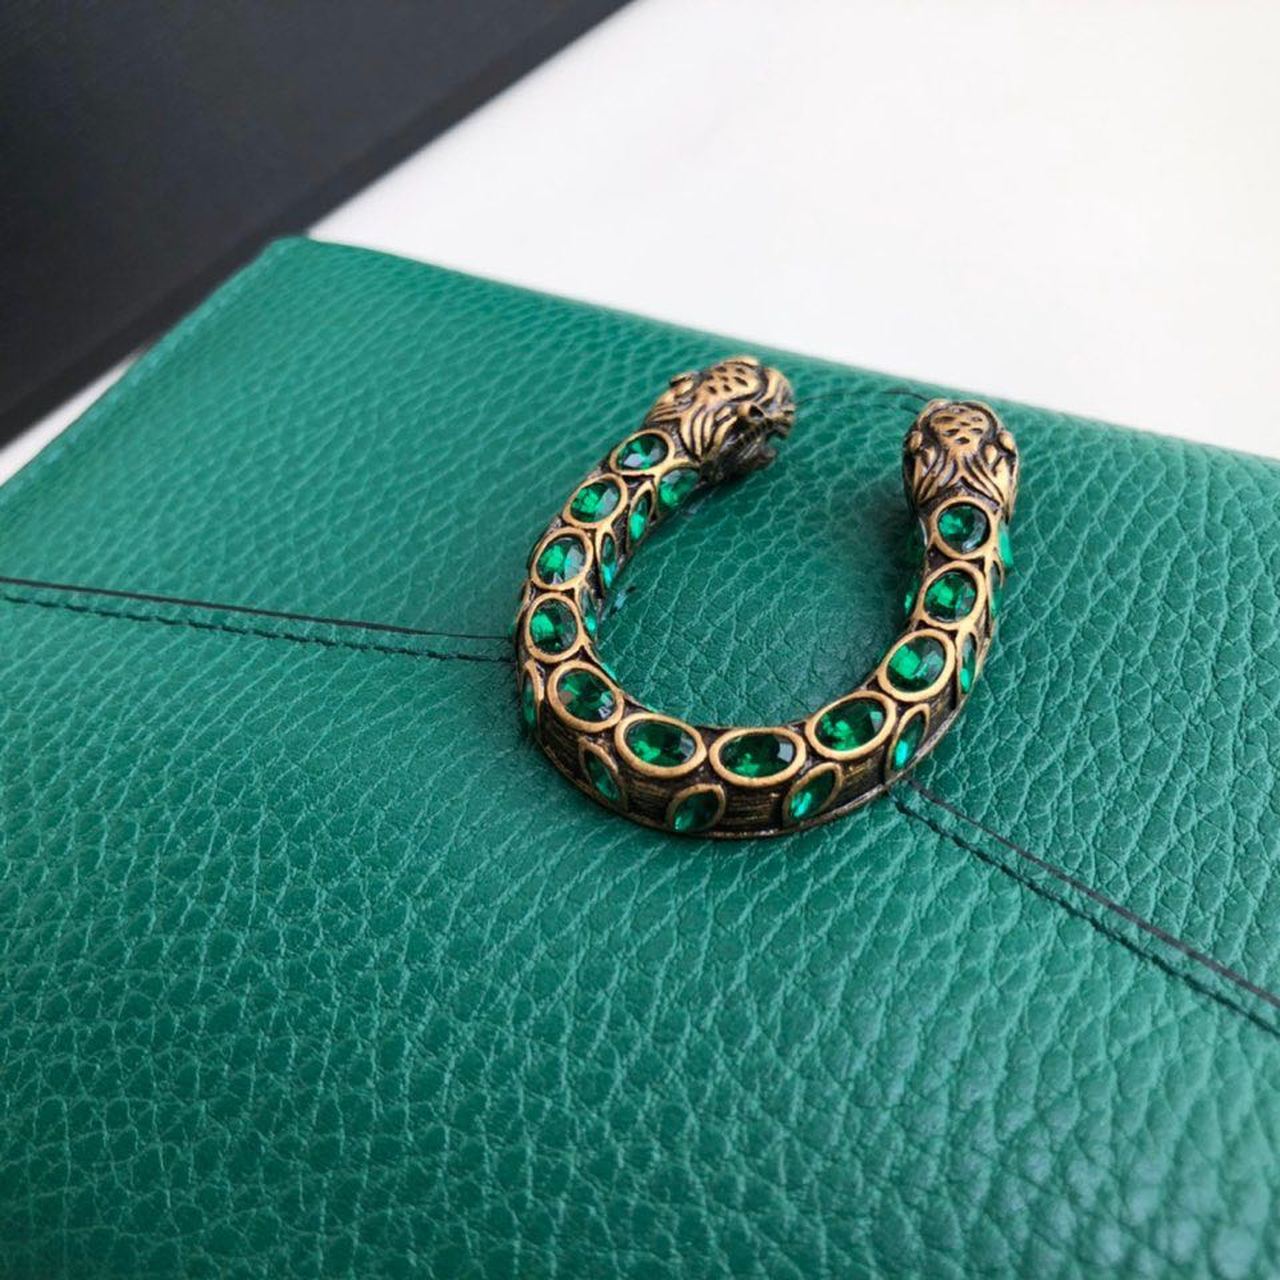 gg Dionysus Mini Chain Bag Emerald Green Metal-Free Tanned For Women 8in/20cm gg 401231 CAOGX 3120